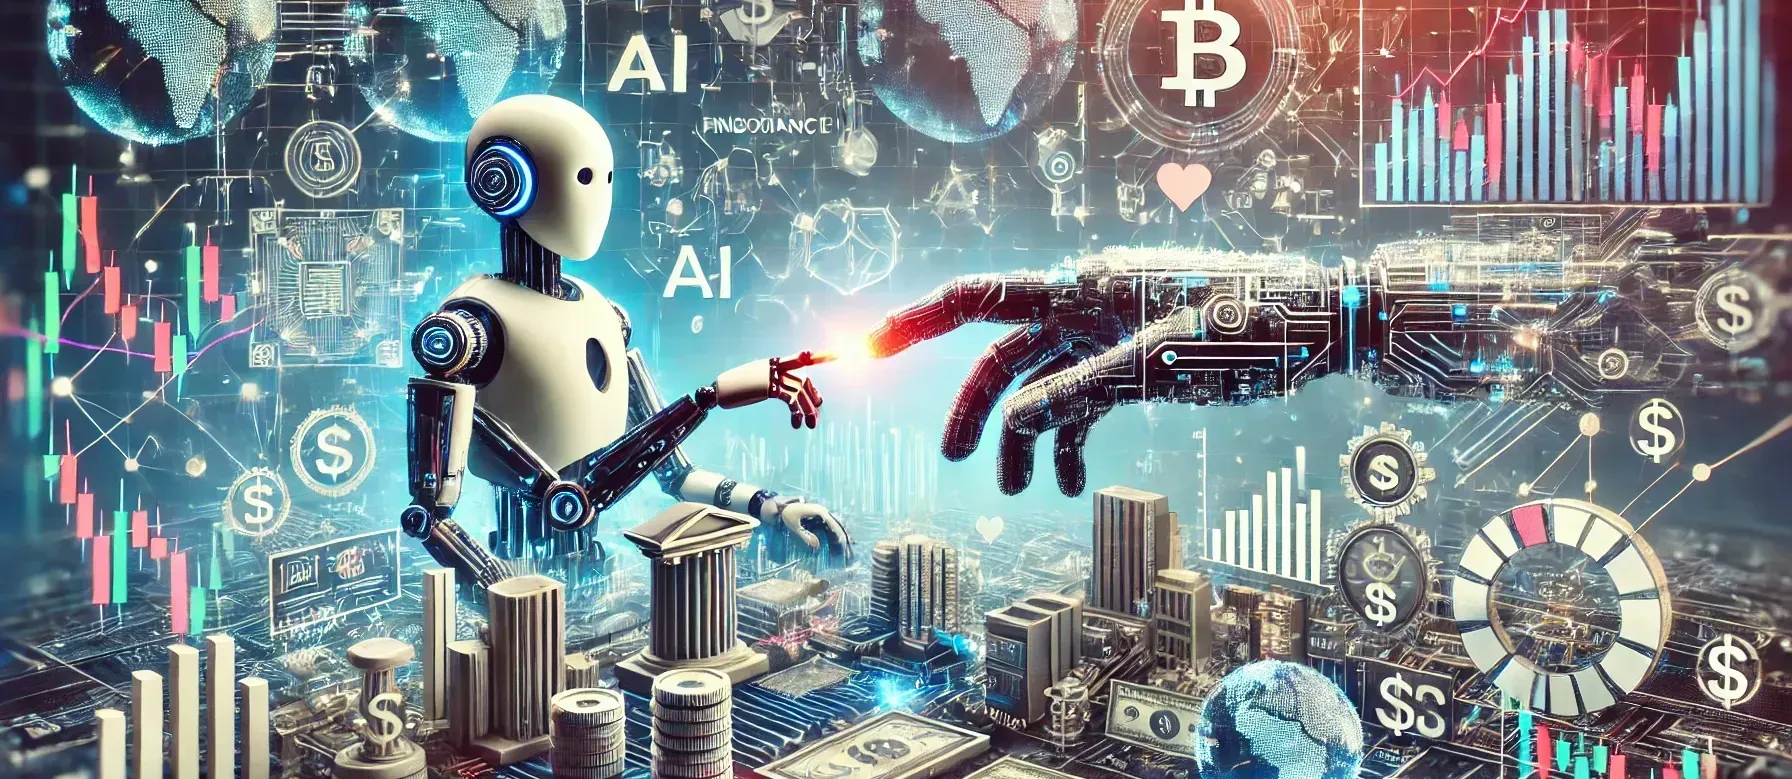 Create a simpler and more realistic representation of the world of AI meeting the world of finance. The image should show elements of both realms interacting seamlessly. Depict AI with robotic elements, digital data, and futuristic technology, while finance should include stock market charts, currency symbols, and financial graphs. The scene should blend these elements in a harmonious and visually appealing manner, highlighting the integration of AI technology in the financial sector. The overall composition should convey innovation and synergy between AI and finance, in a 4:2 aspect ratio.